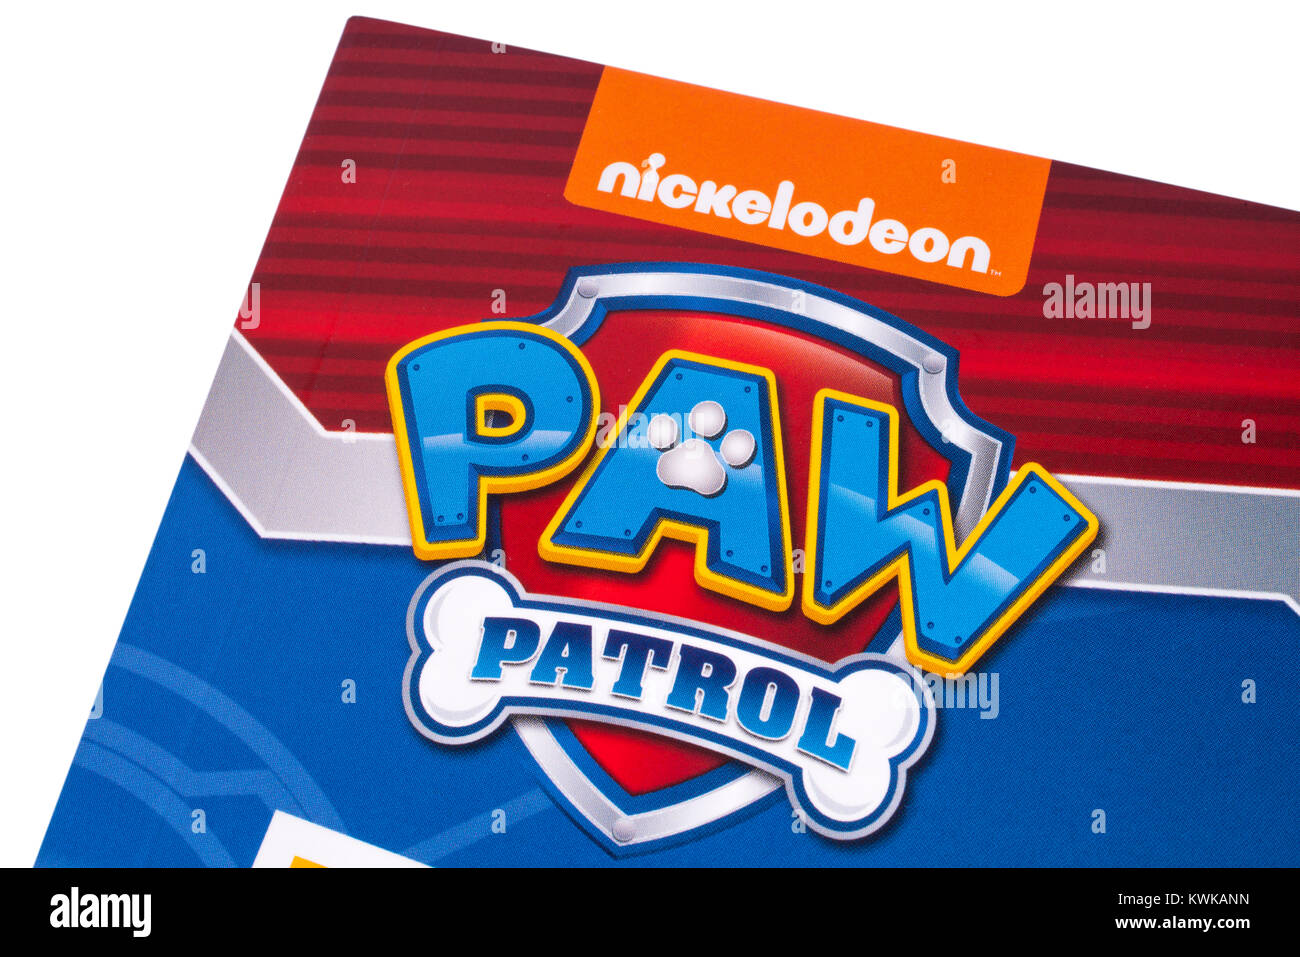 LONDON, UK - DECEMBER 18TH 2017: A close-up of the Paw Patrol logo on the front cover of a childrens book, on 18th December 2017.  Paw Patrol is an an Stock Photo